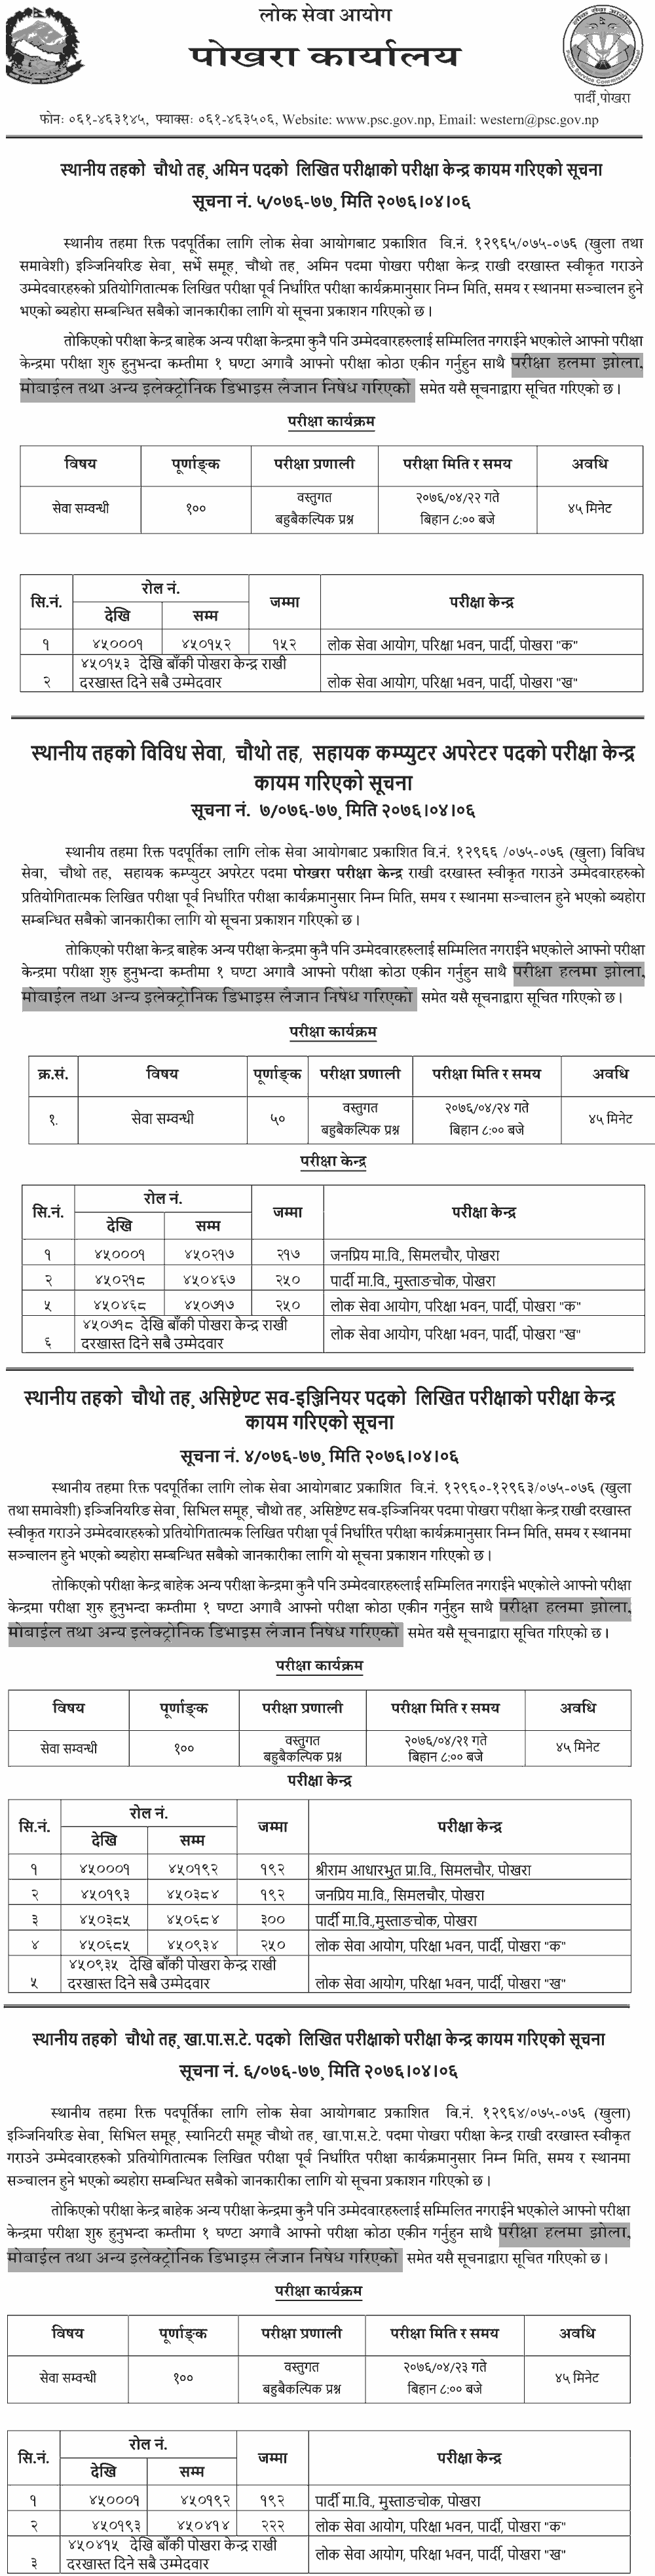 Local Level Technical 4th and 5th Level Written Exam Center - Pokhara